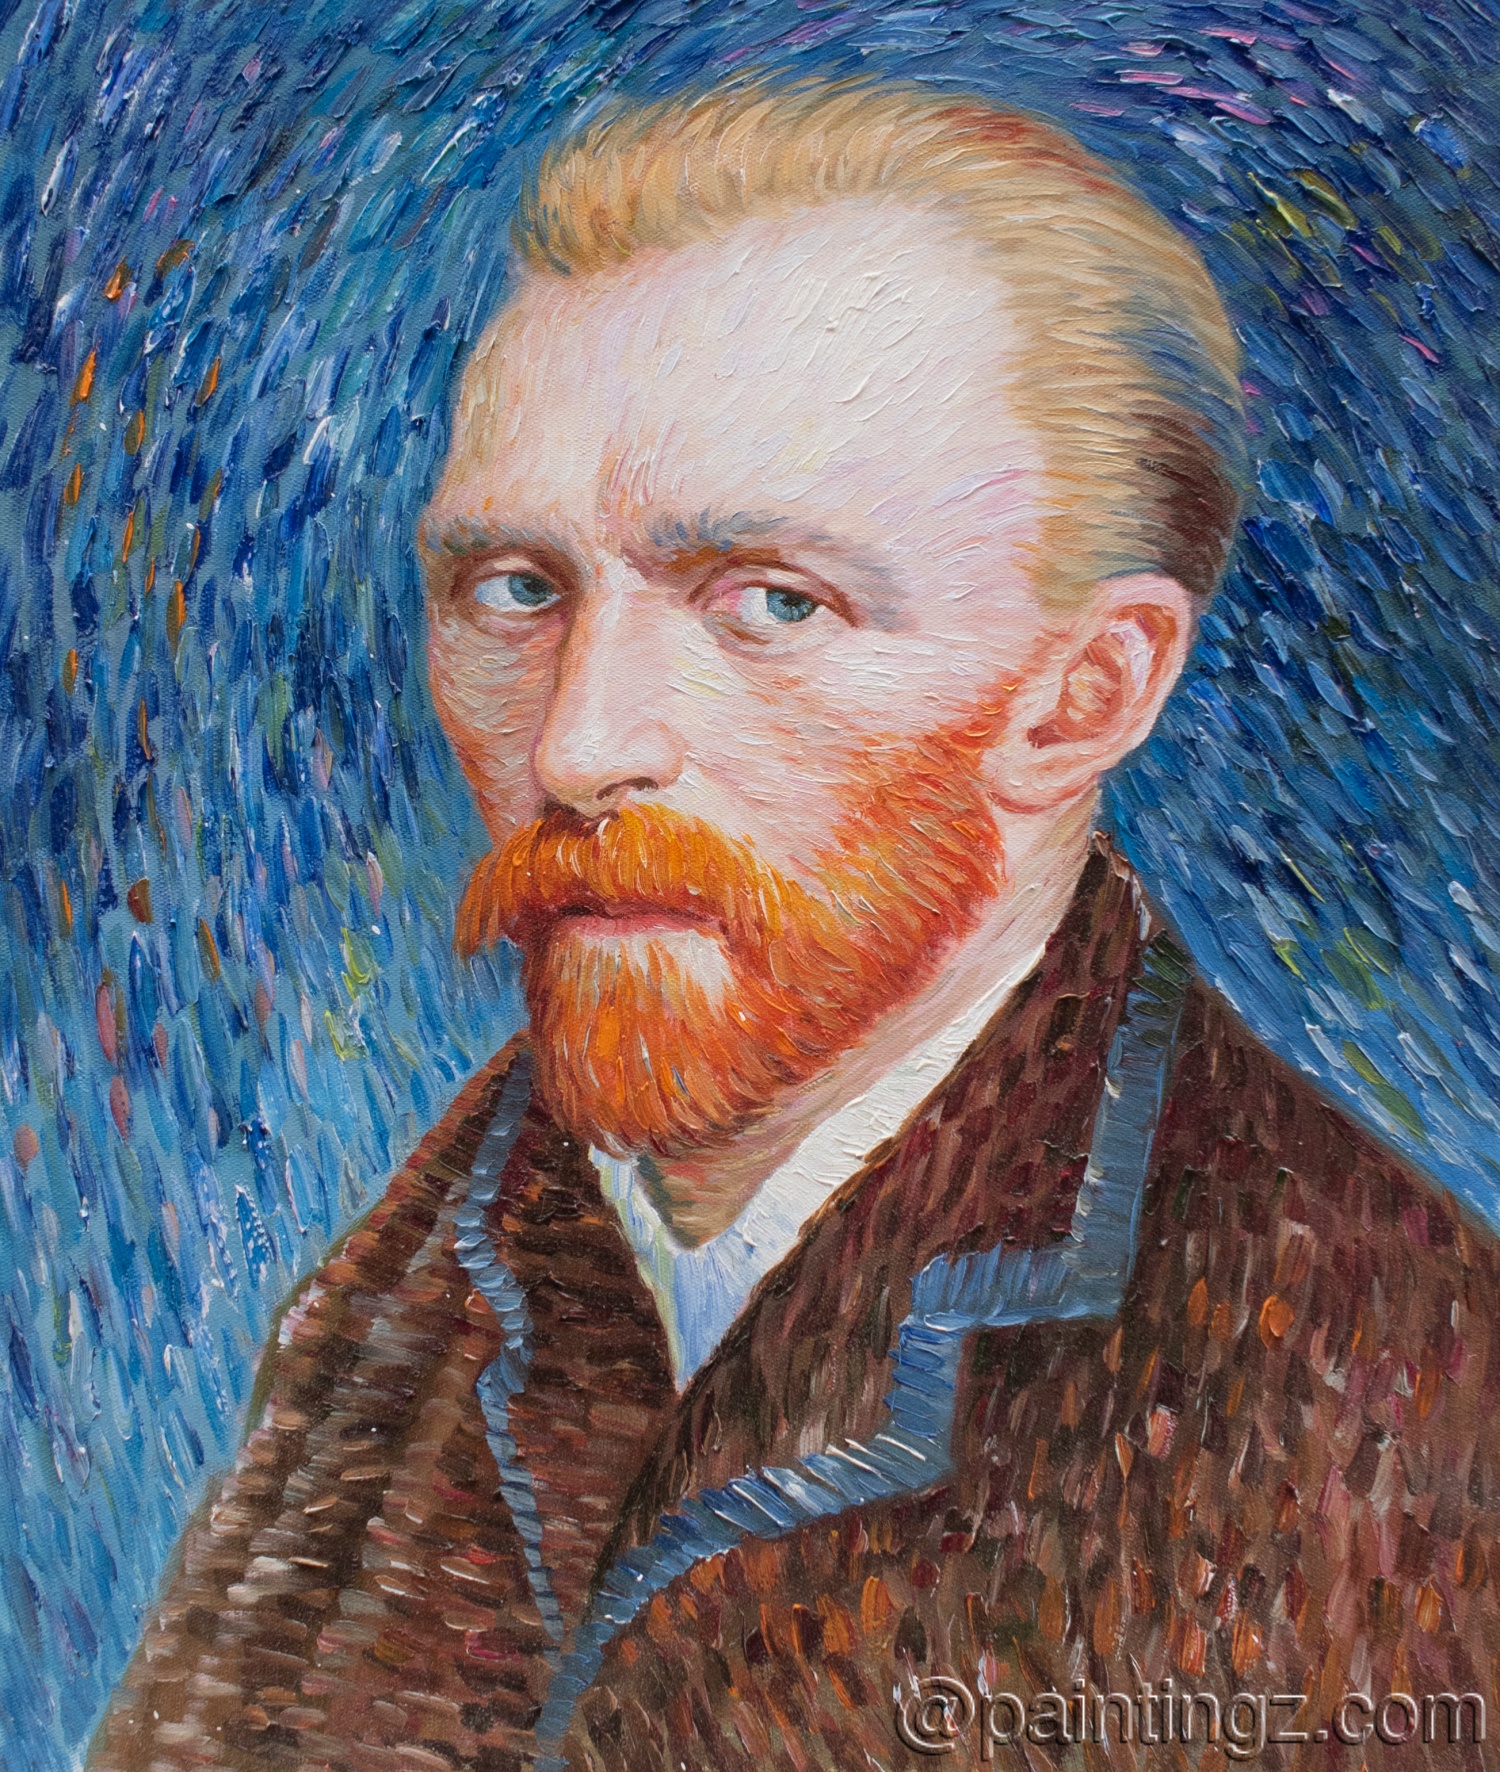 Another Self-Portrait Reproduction of Van Gogh